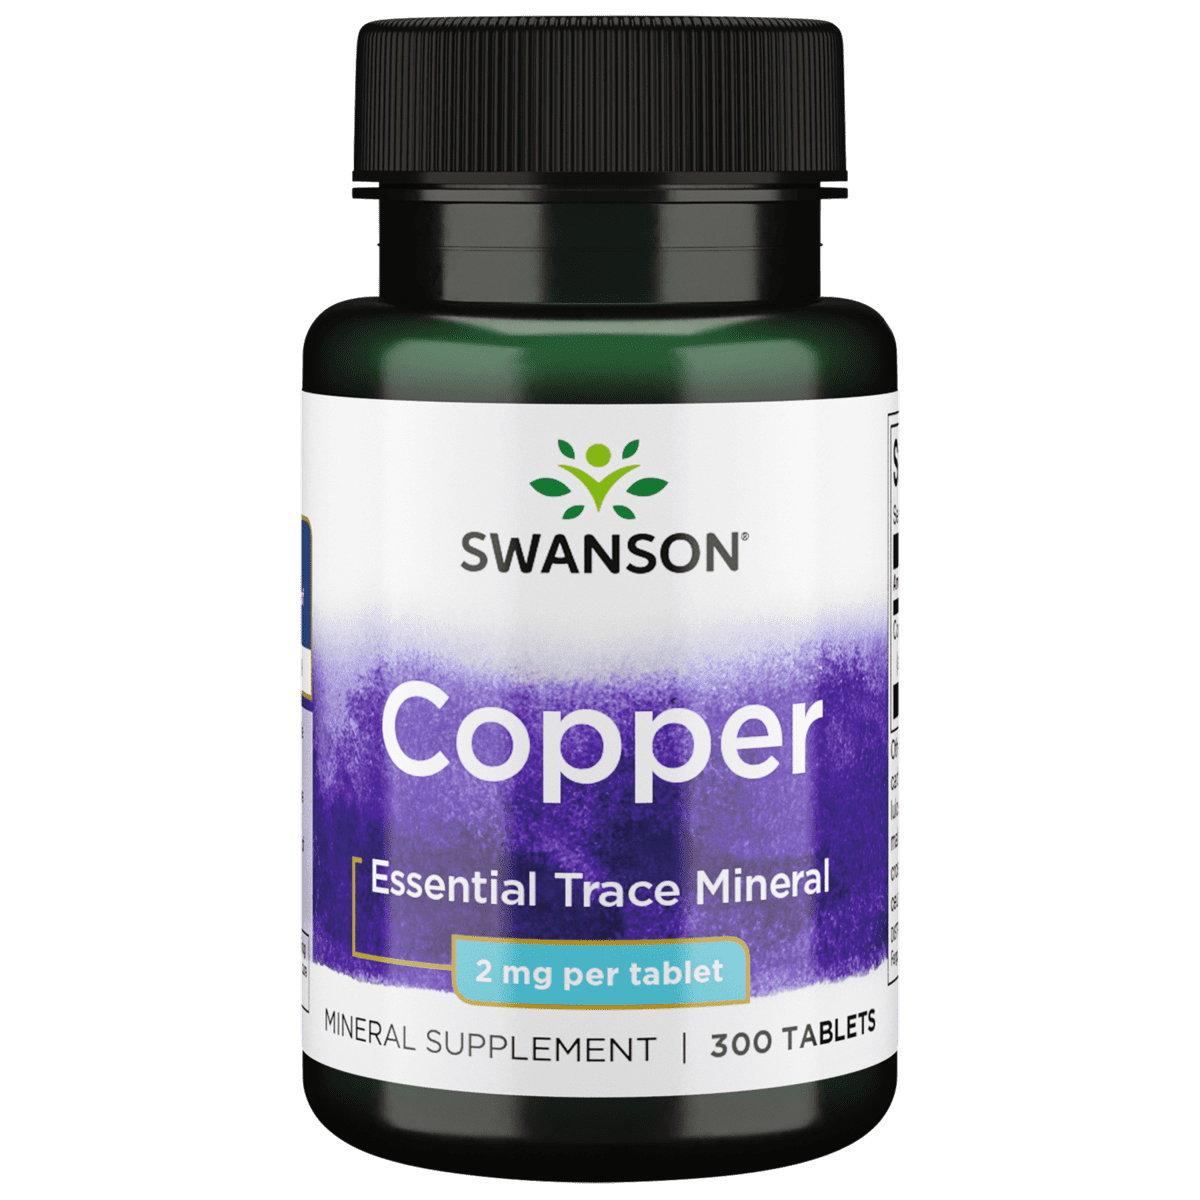 Swanson Copper Antioxidant Immune System Red Blood Cell Support Mineral Supplement (Copper chelate) 2 mg 300 Tabs